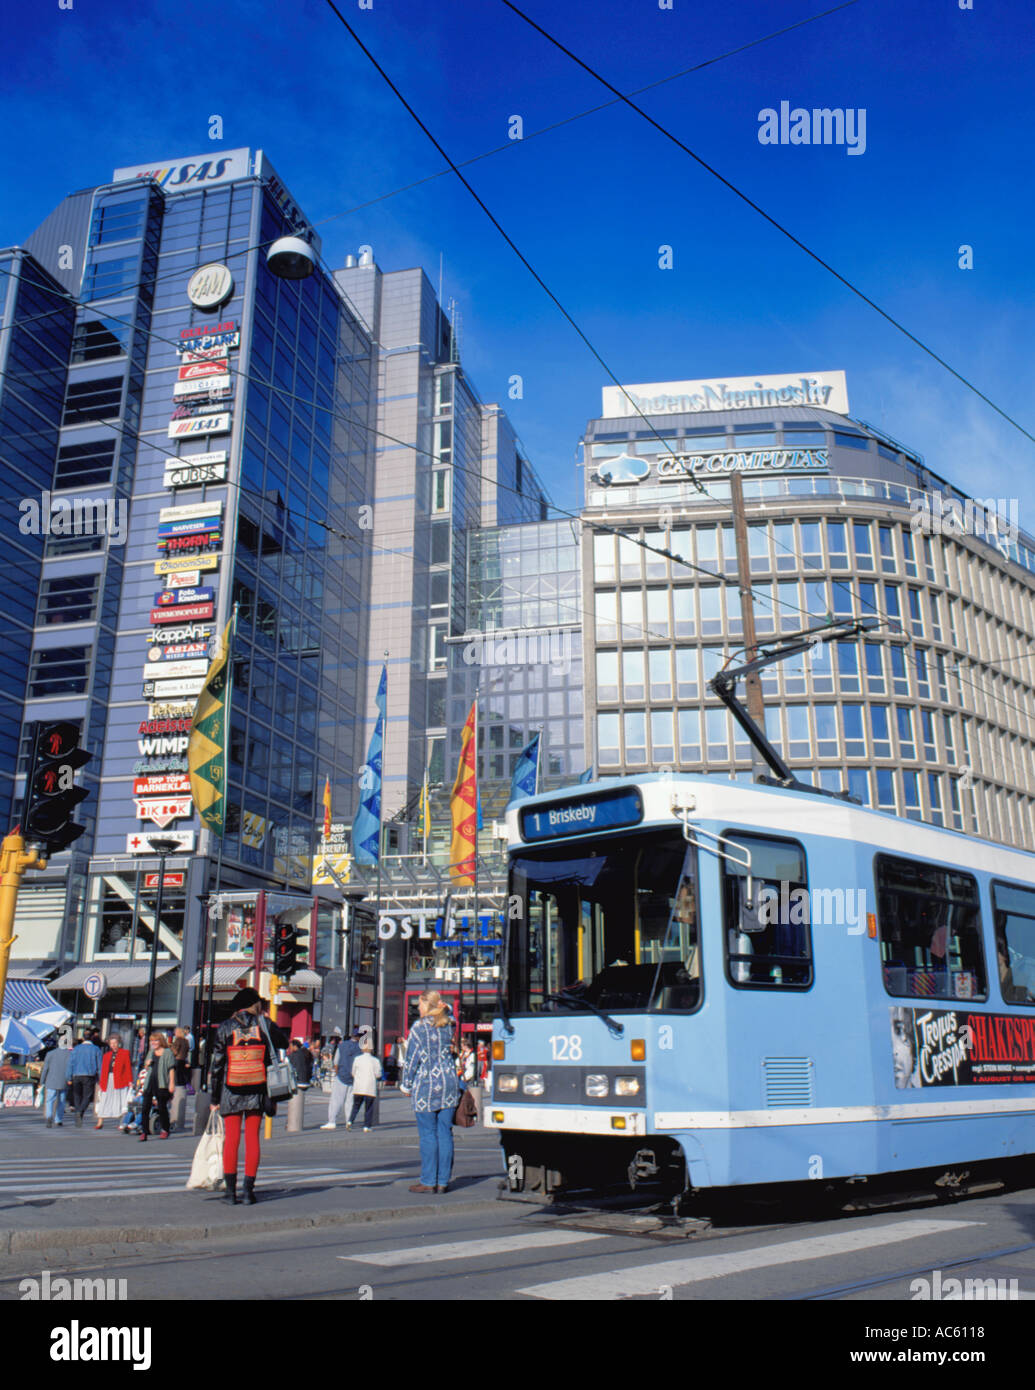 Electric tram with Oslo City shopping centre beyond, central Oslo, Norway. Stock Photo